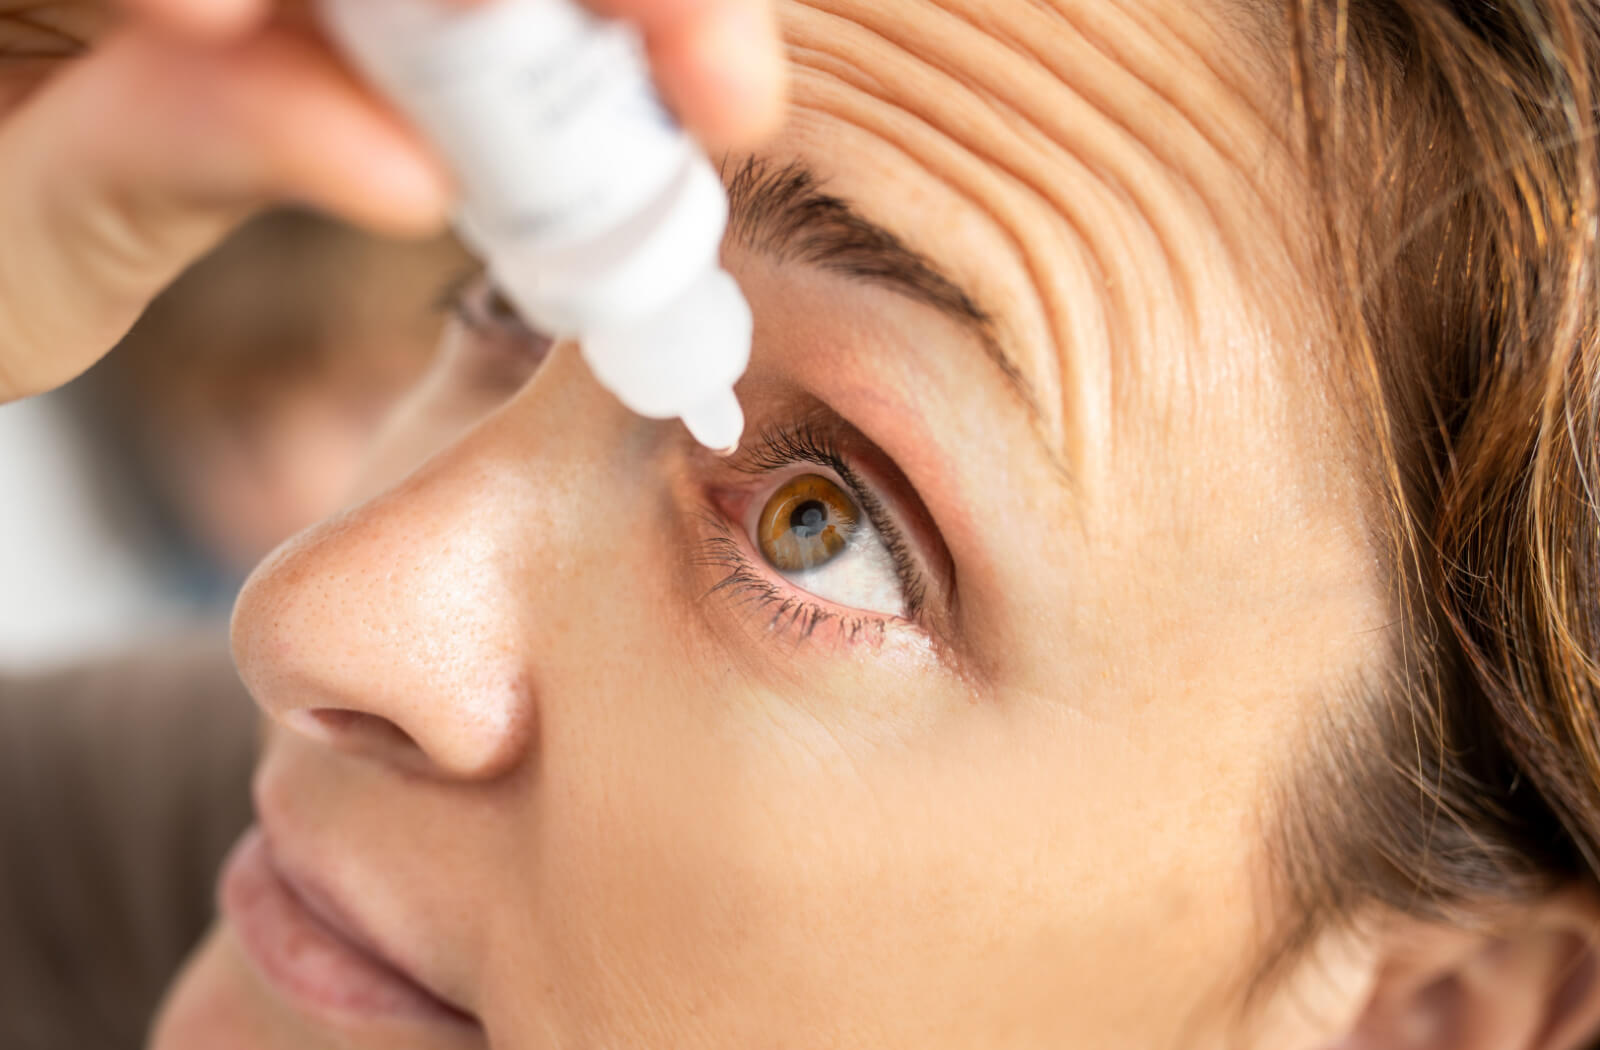 A close-up of a woman applying prescription eye drops on her left eye.